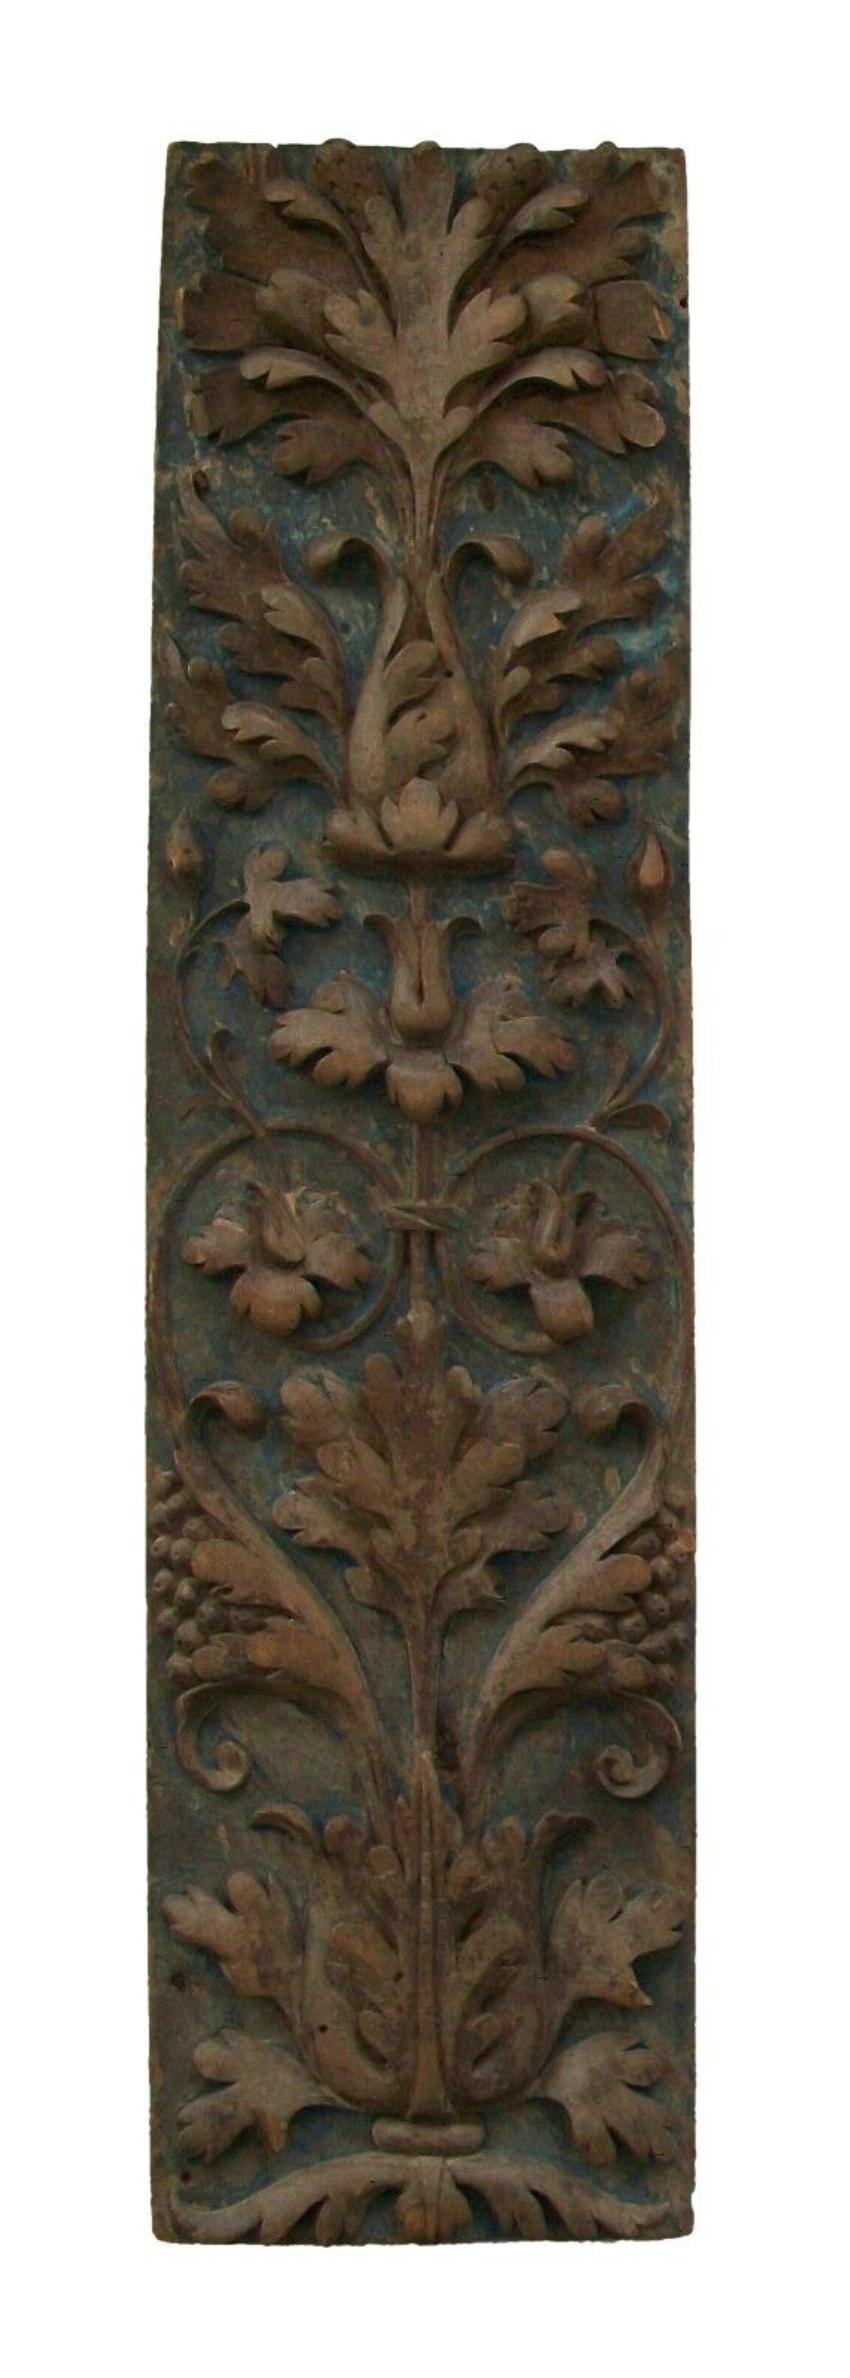 Softwood Renaissance Carved & Painted Fruitwood Panels, Signed, France, 16th Century